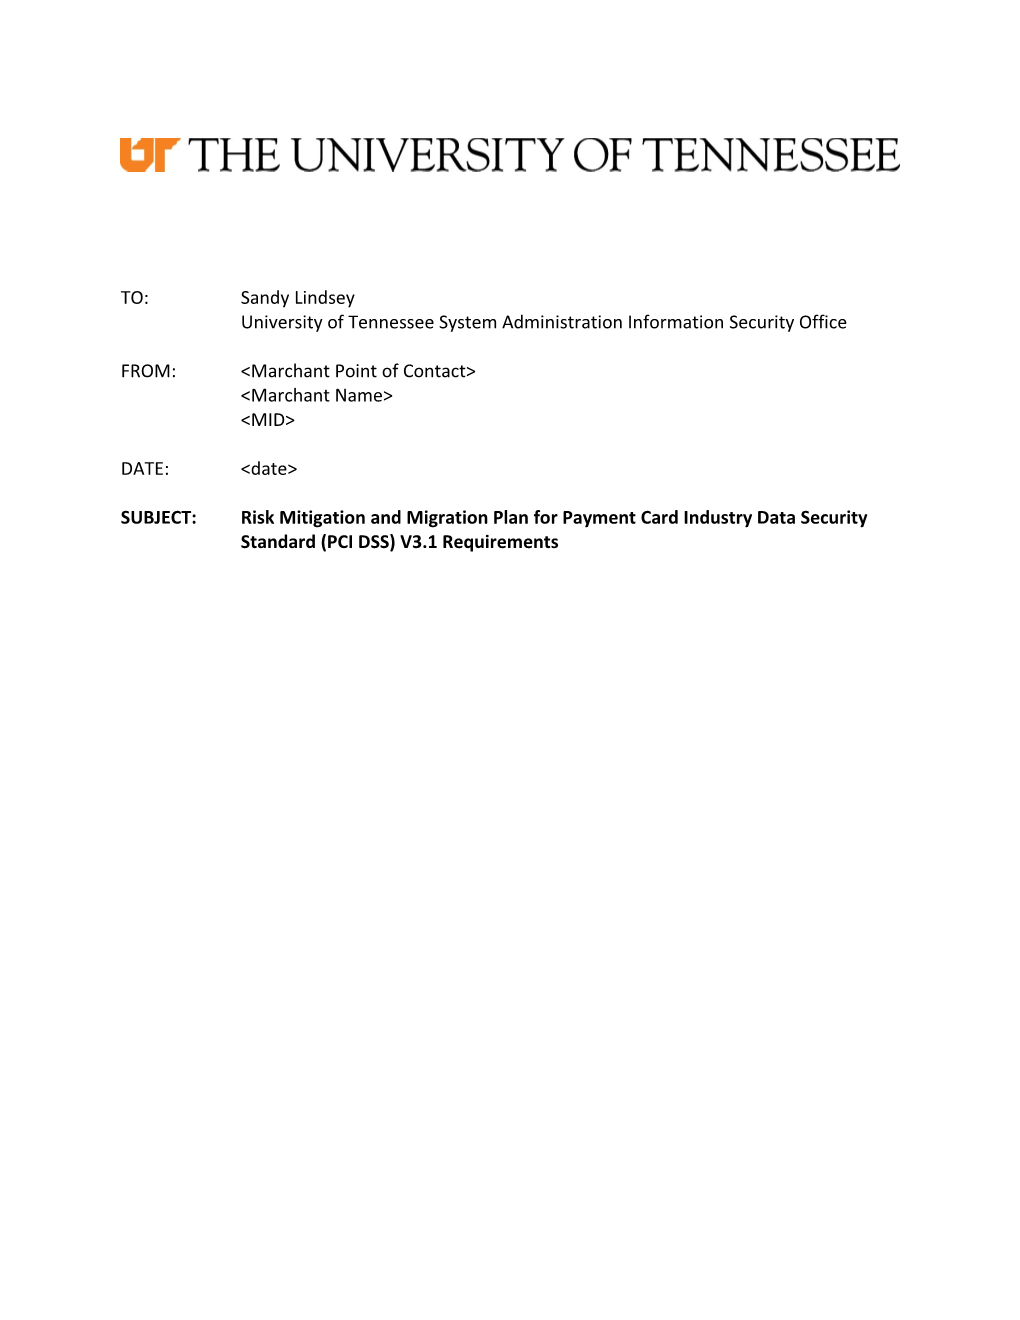 University of Tennessee System Administration Information Security Office